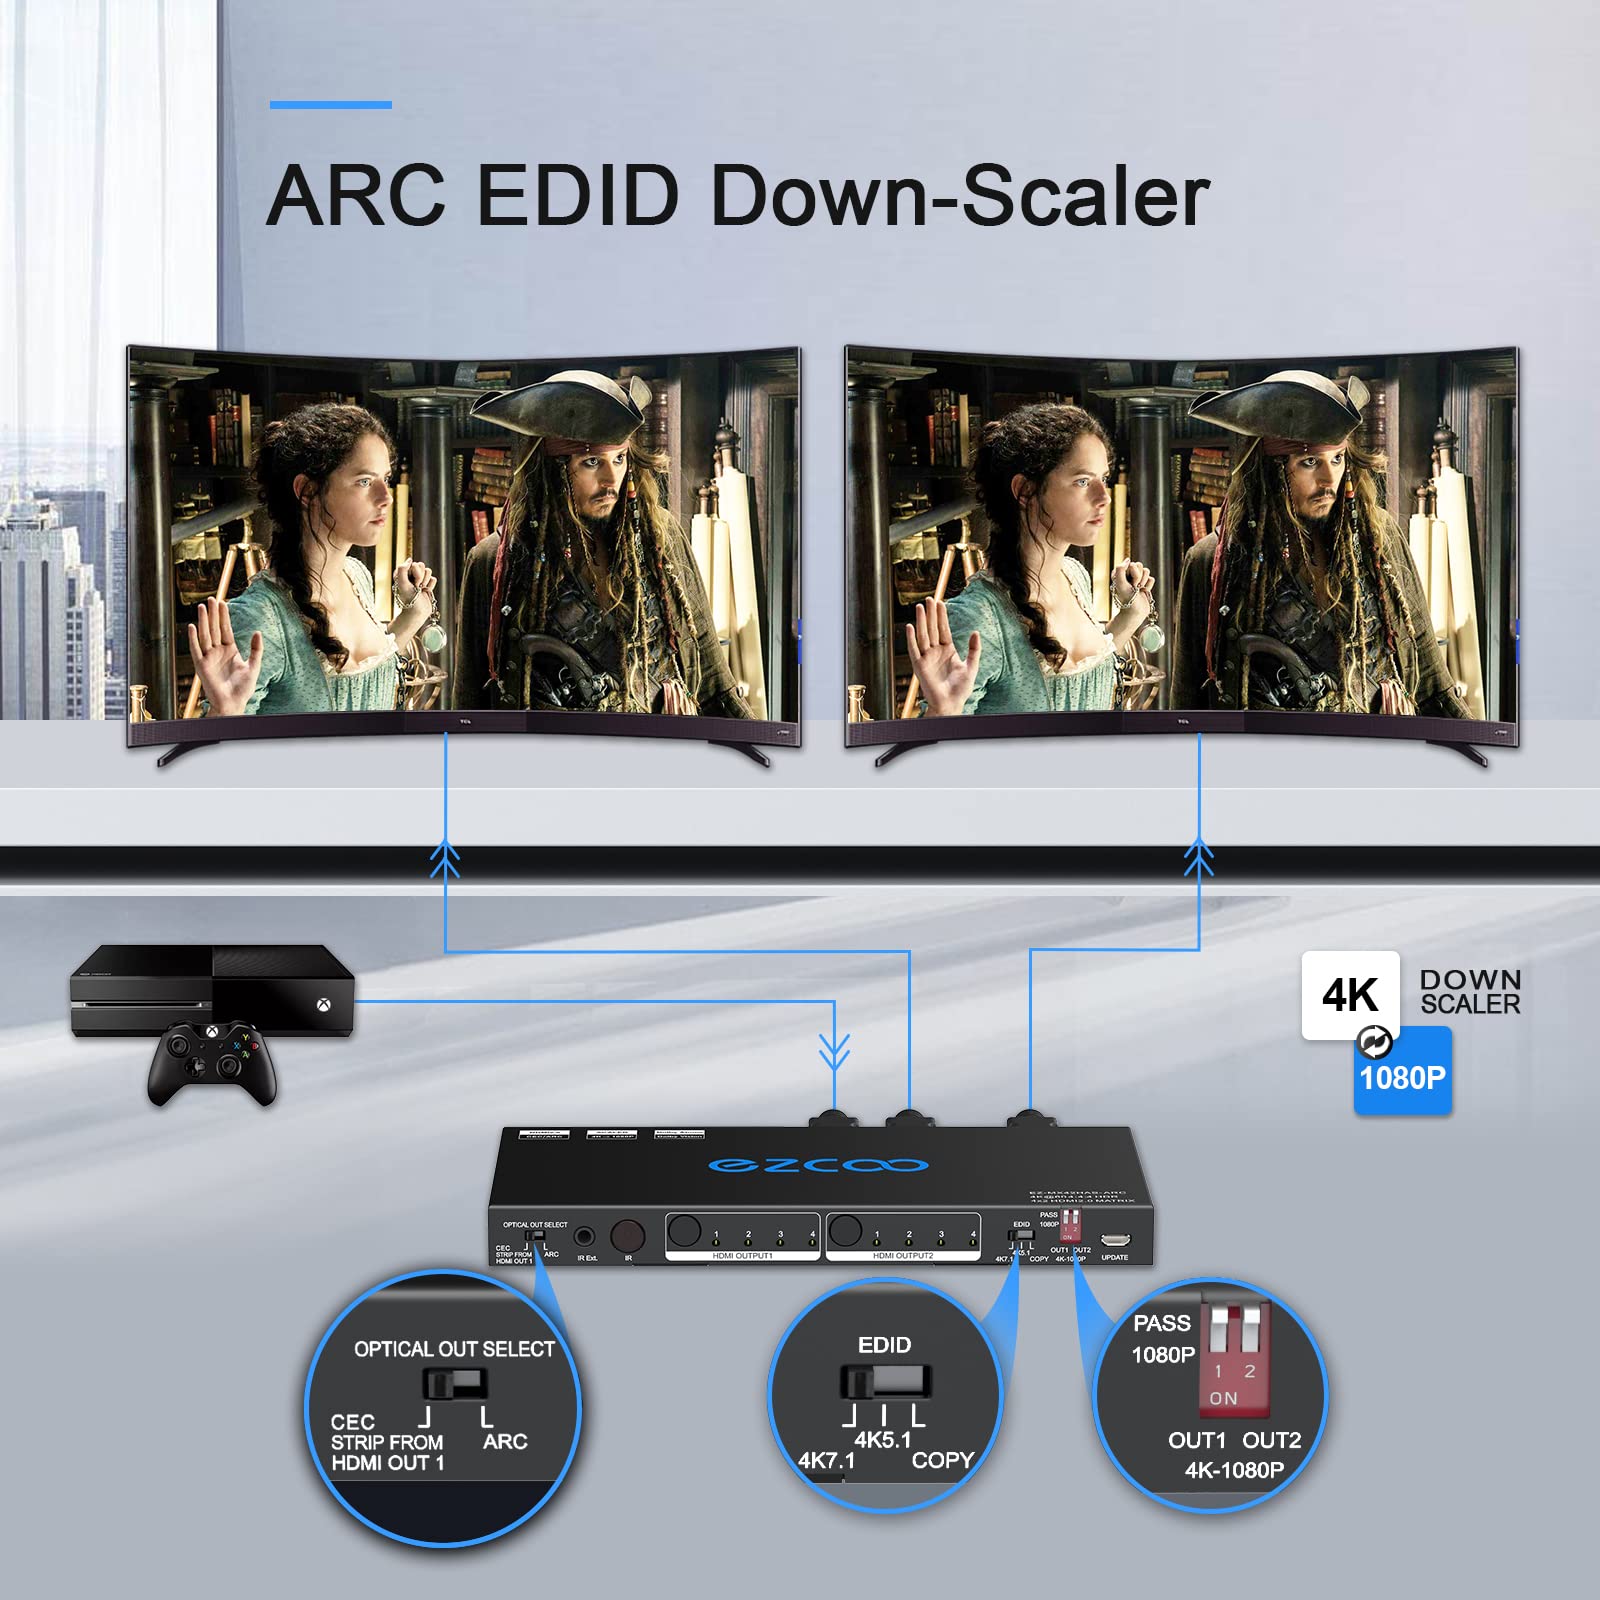 HDMI Matrix ARC 4 In 2 Out 4K HDR EDID 4K7.1/5.1/COPY Switch with SPDIF L/R Audio Extractor - Down-Scale 4K to 1080P,D-o-l-b-y Vision Atmos in Sync,HDMI Switch 4x2 CEC HDCP2.2 4K60 4:4:4 IR Remote Ext